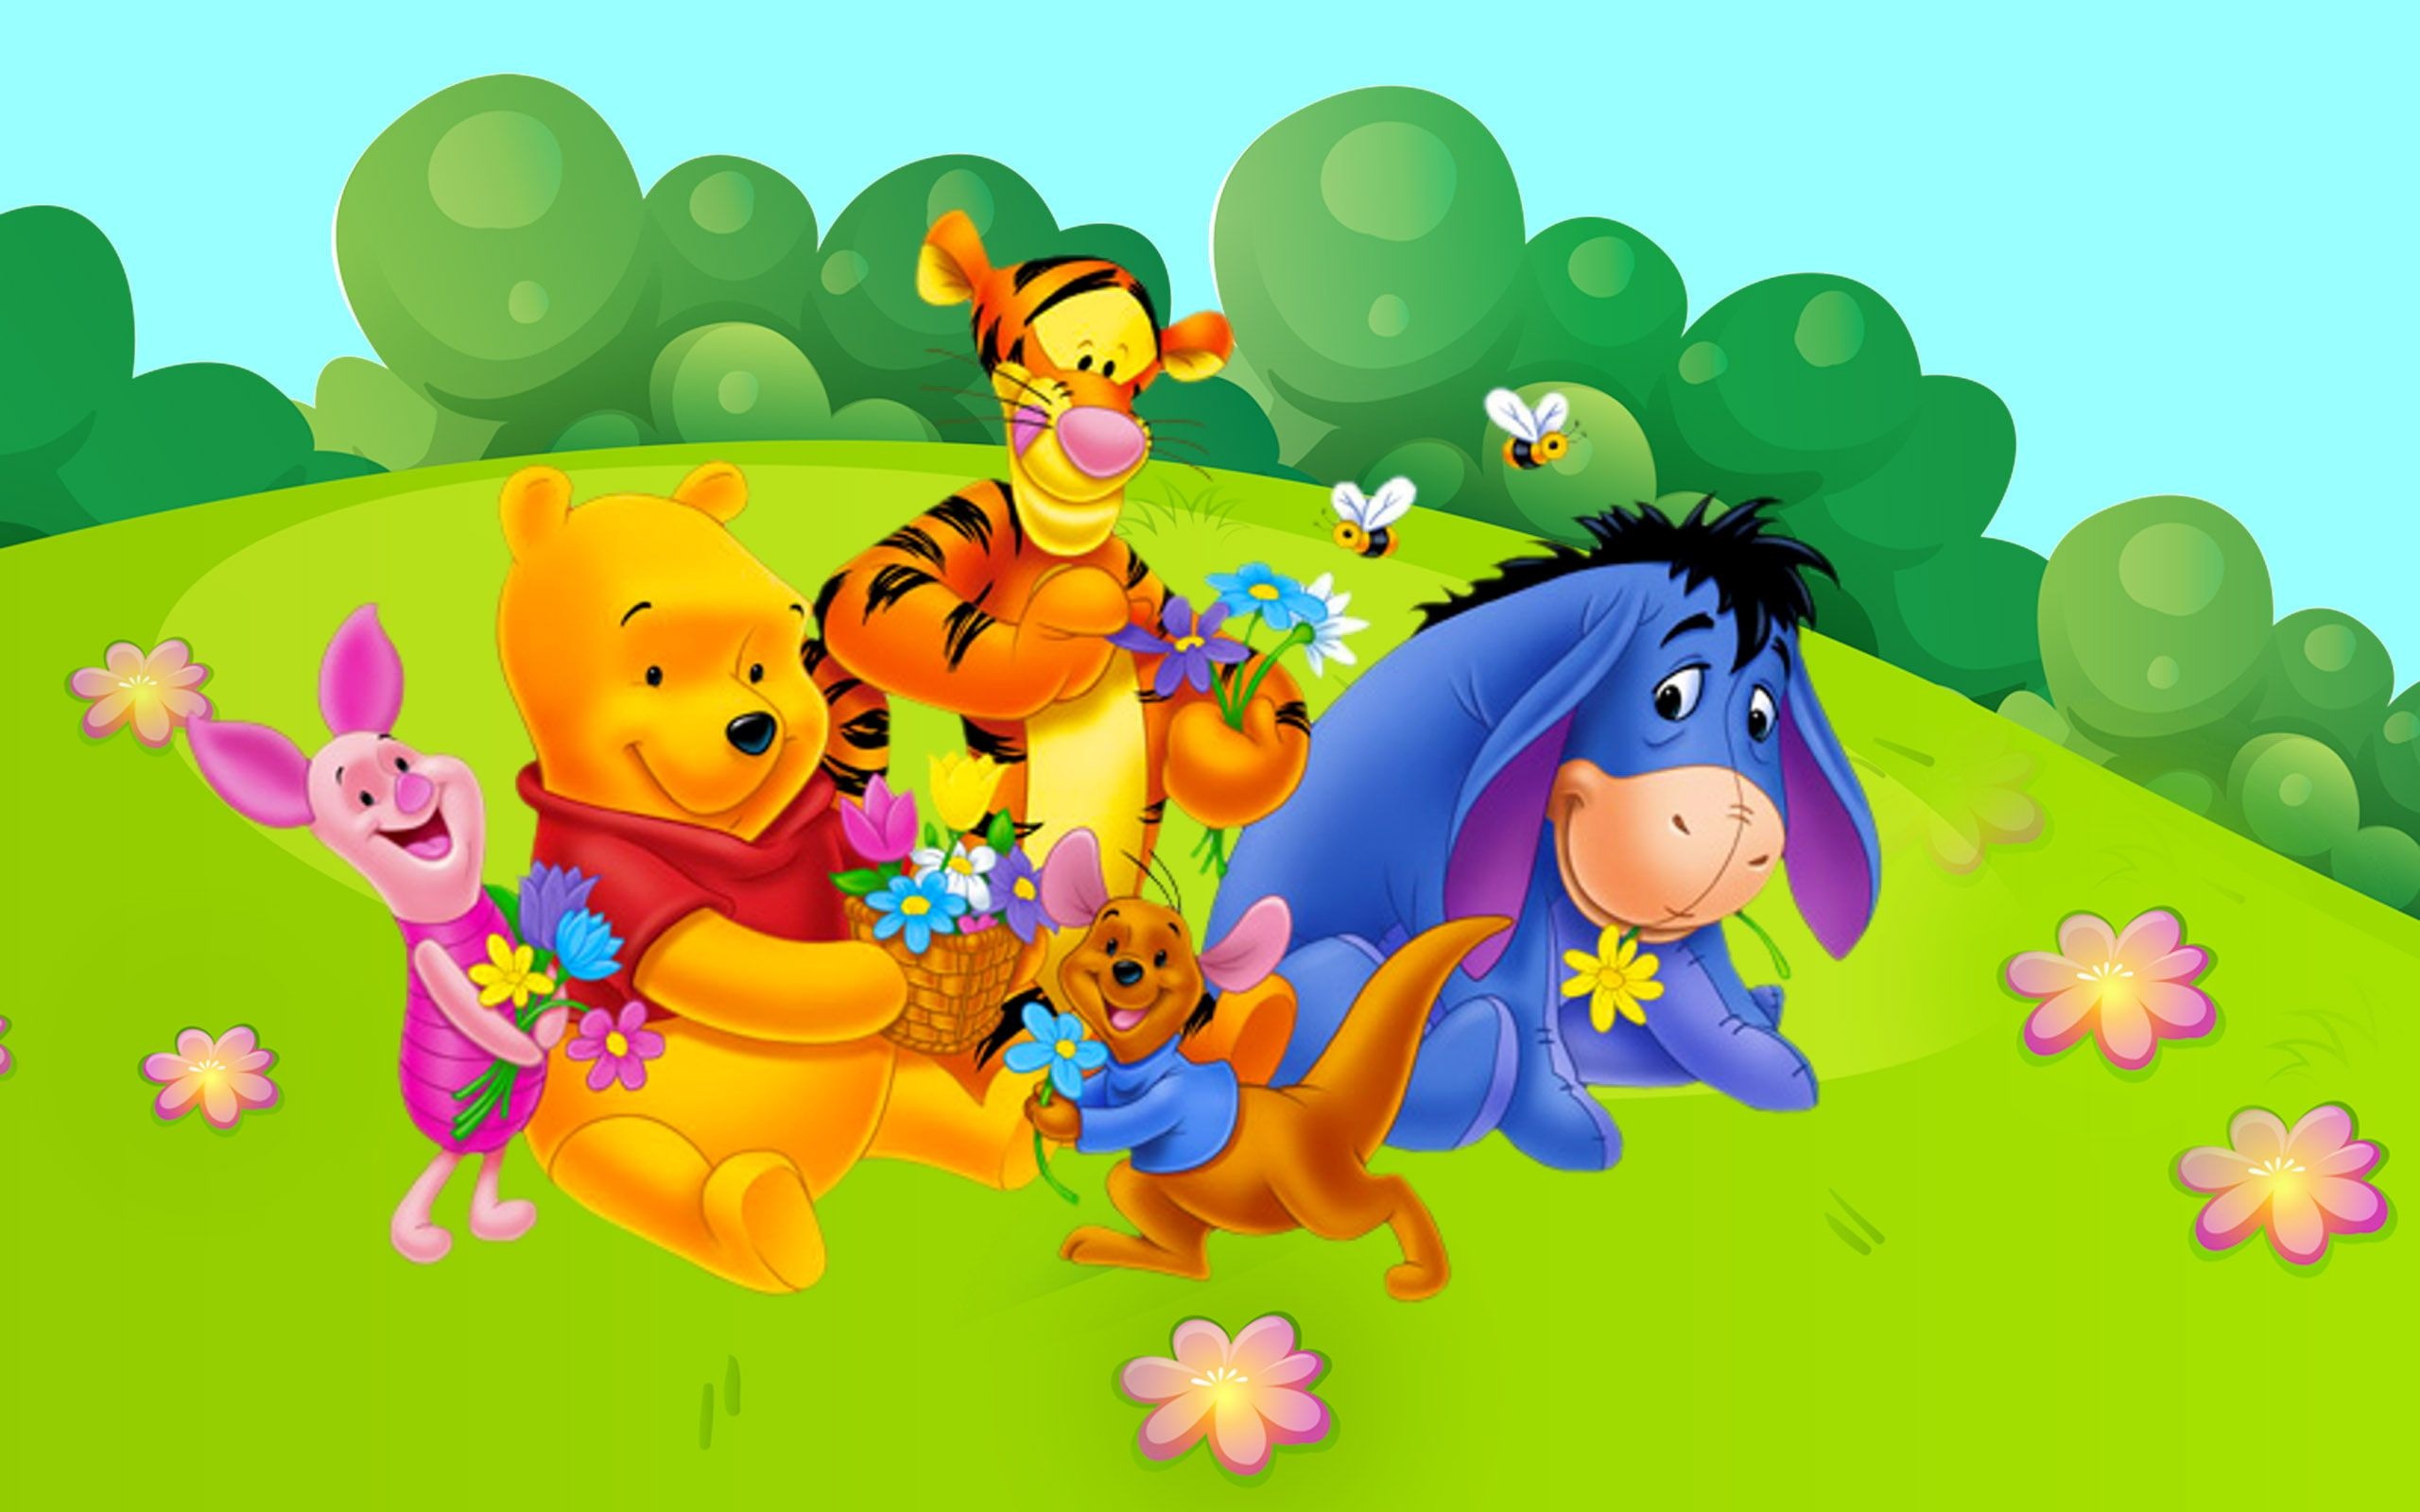 Baby Roo, Winnie-the-Pooh animation, Tigger wallpapers, Tigger backgrounds, 2560x1600 HD Desktop